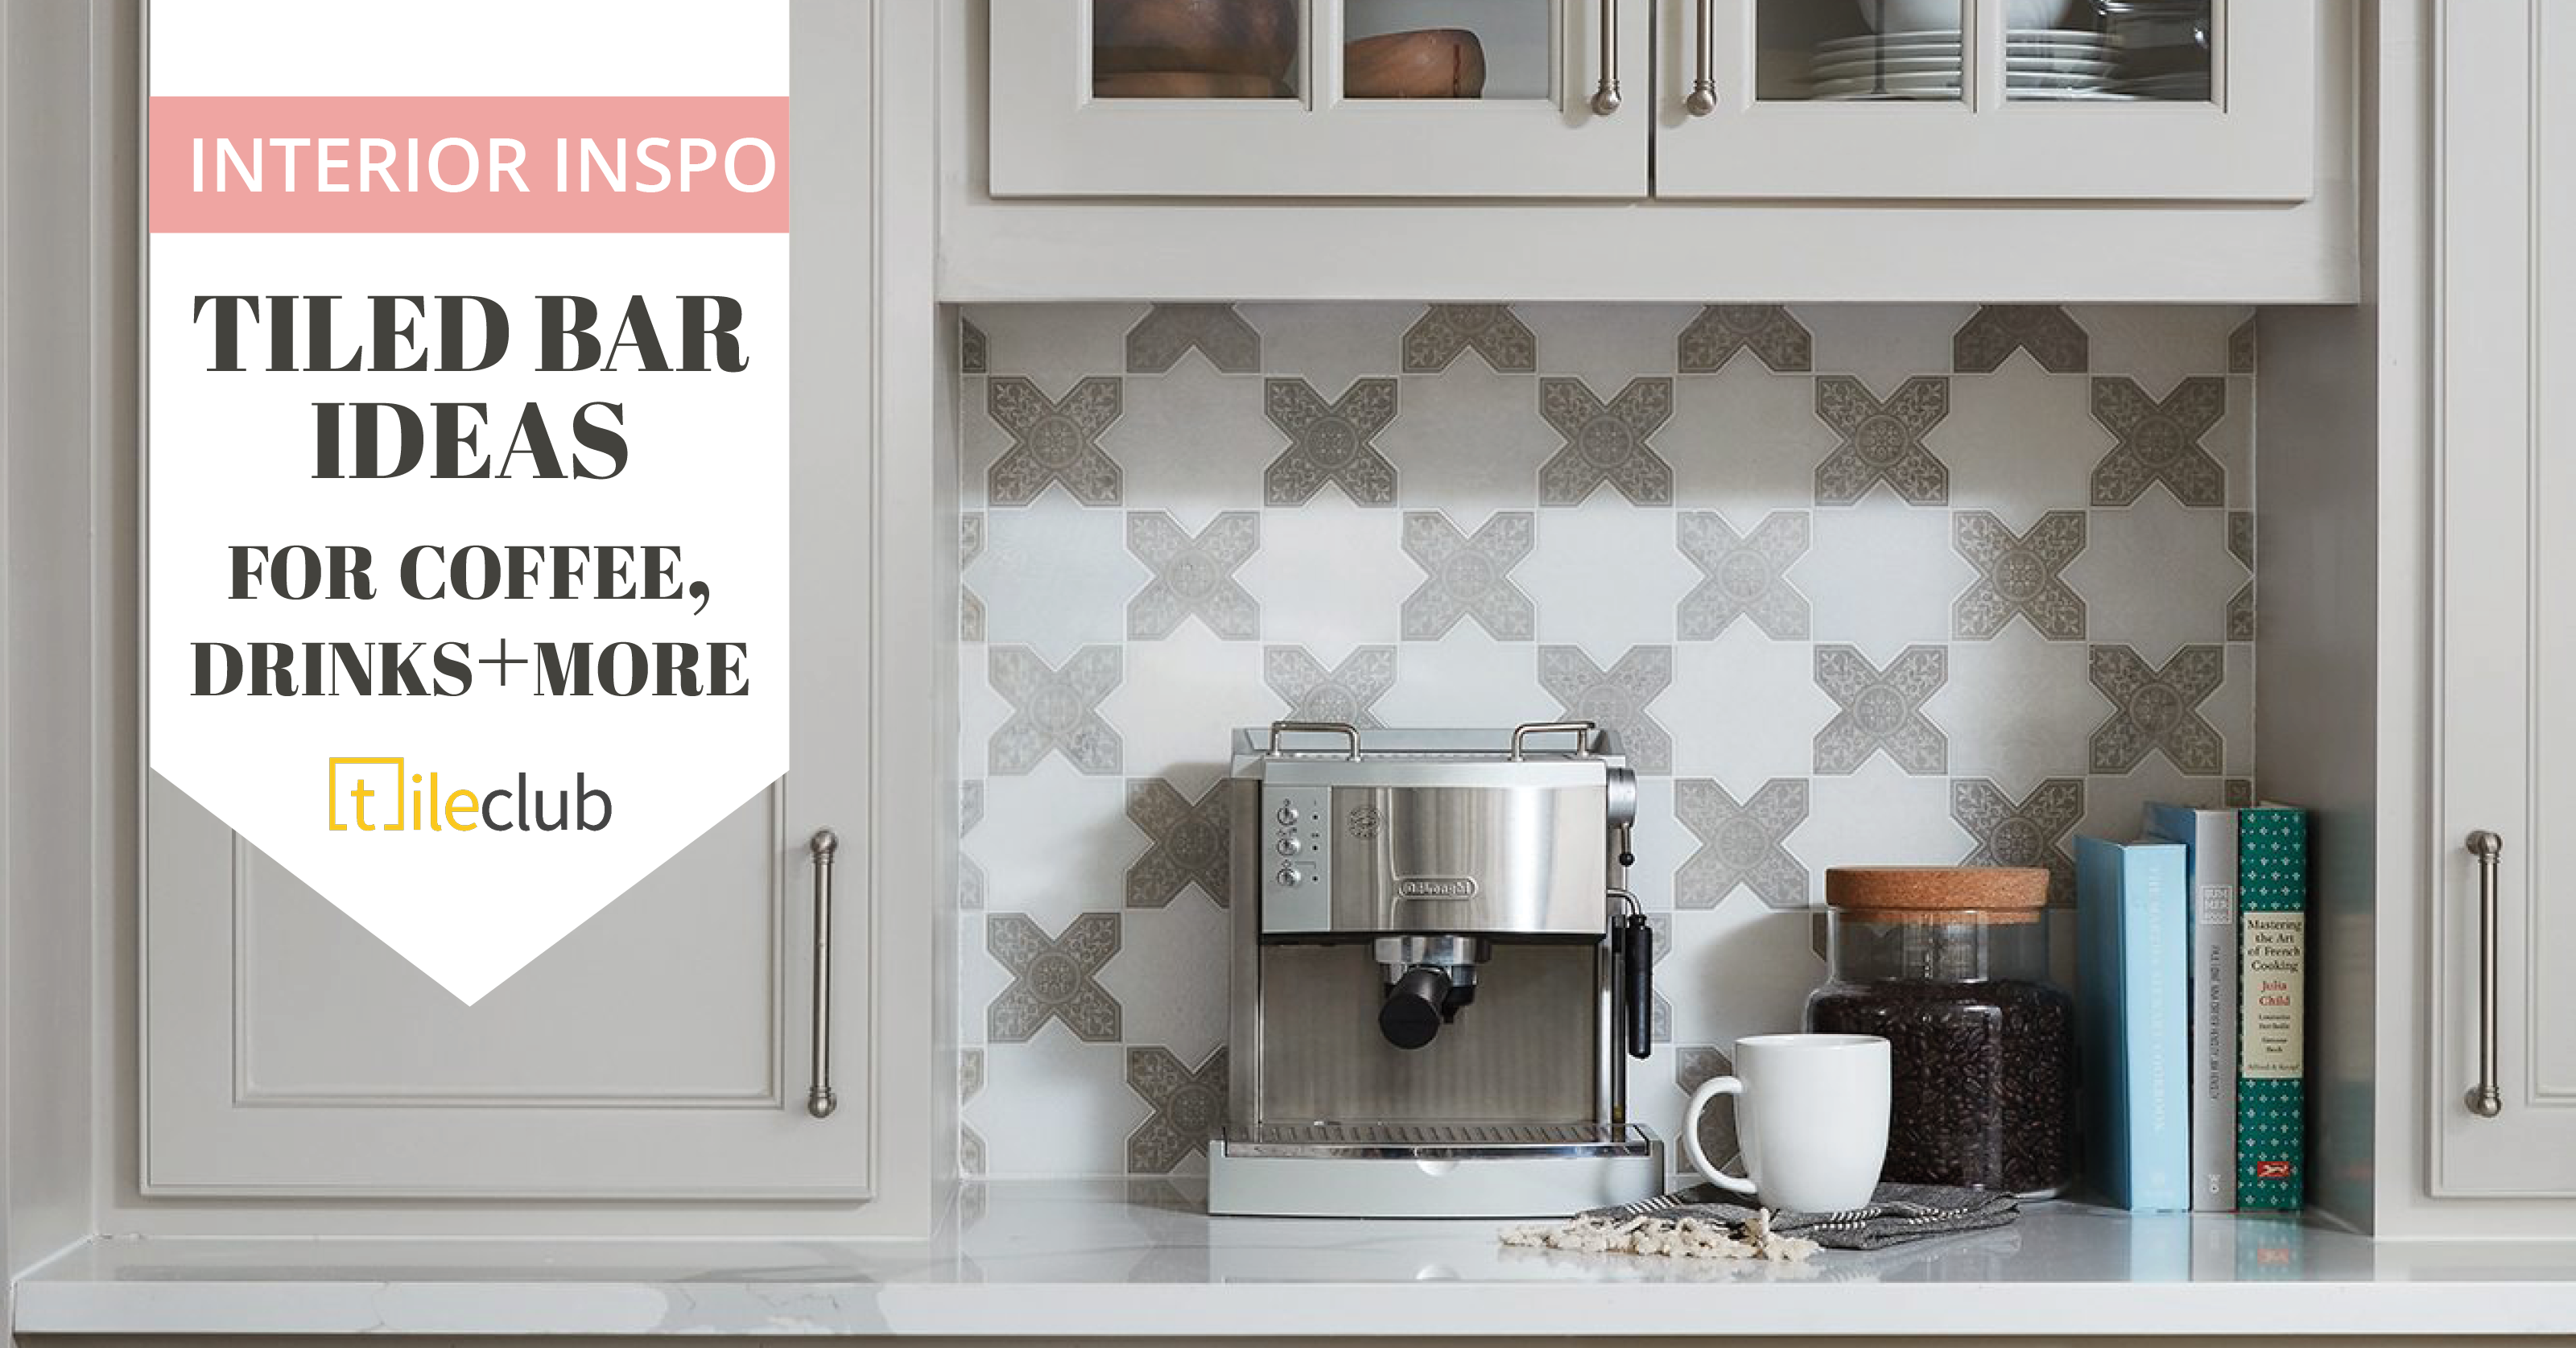 9 Tile Bar Ideas for Coffee, Drinks, and More